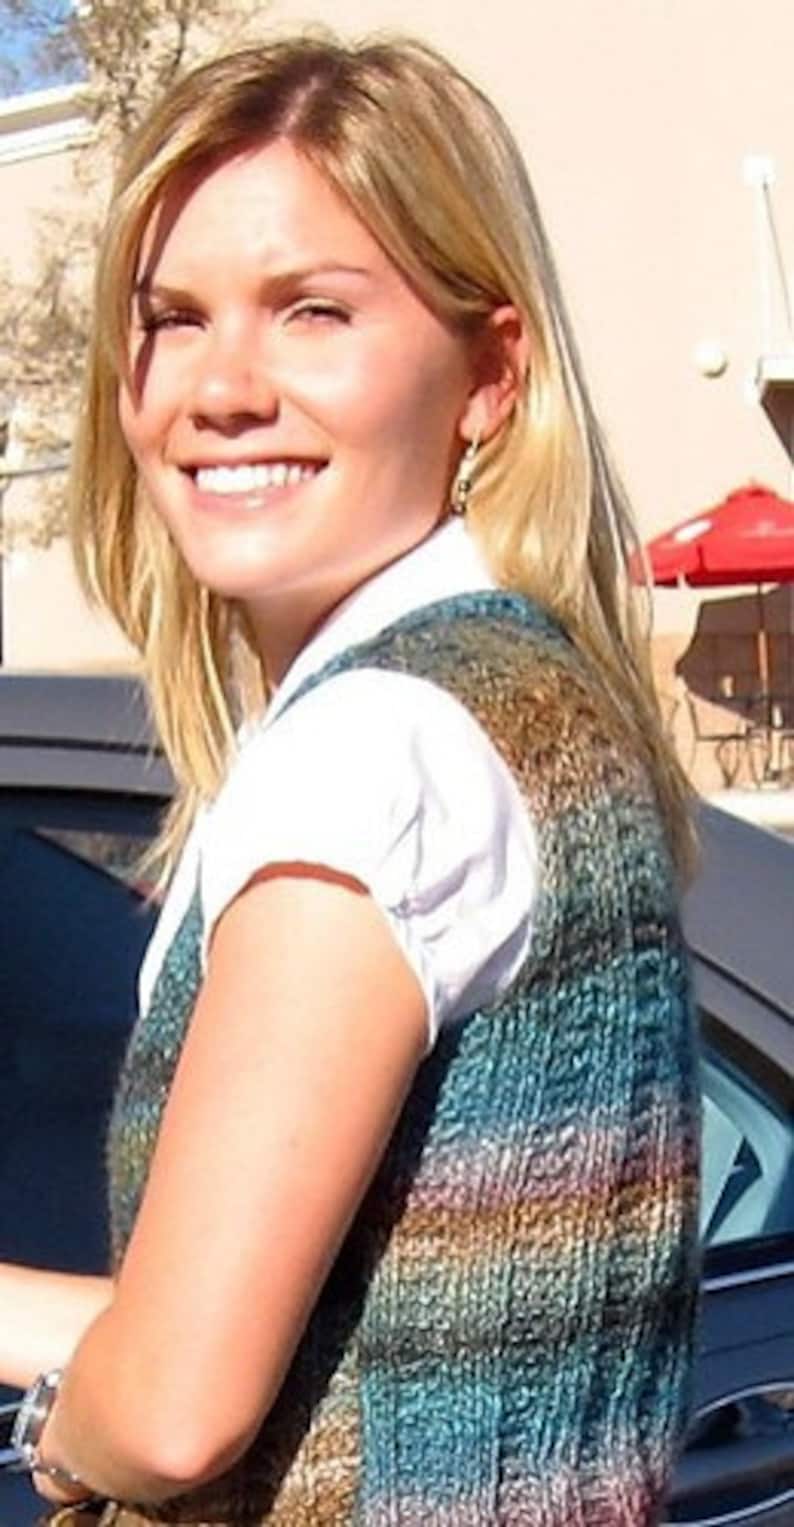 Vest KNITTING PATTERN women,Noro Silk Garden,wool,women waistcoat knitting pattern,blue,teal,sweater vest,easy knit,fall,gift for her,fitted image 3